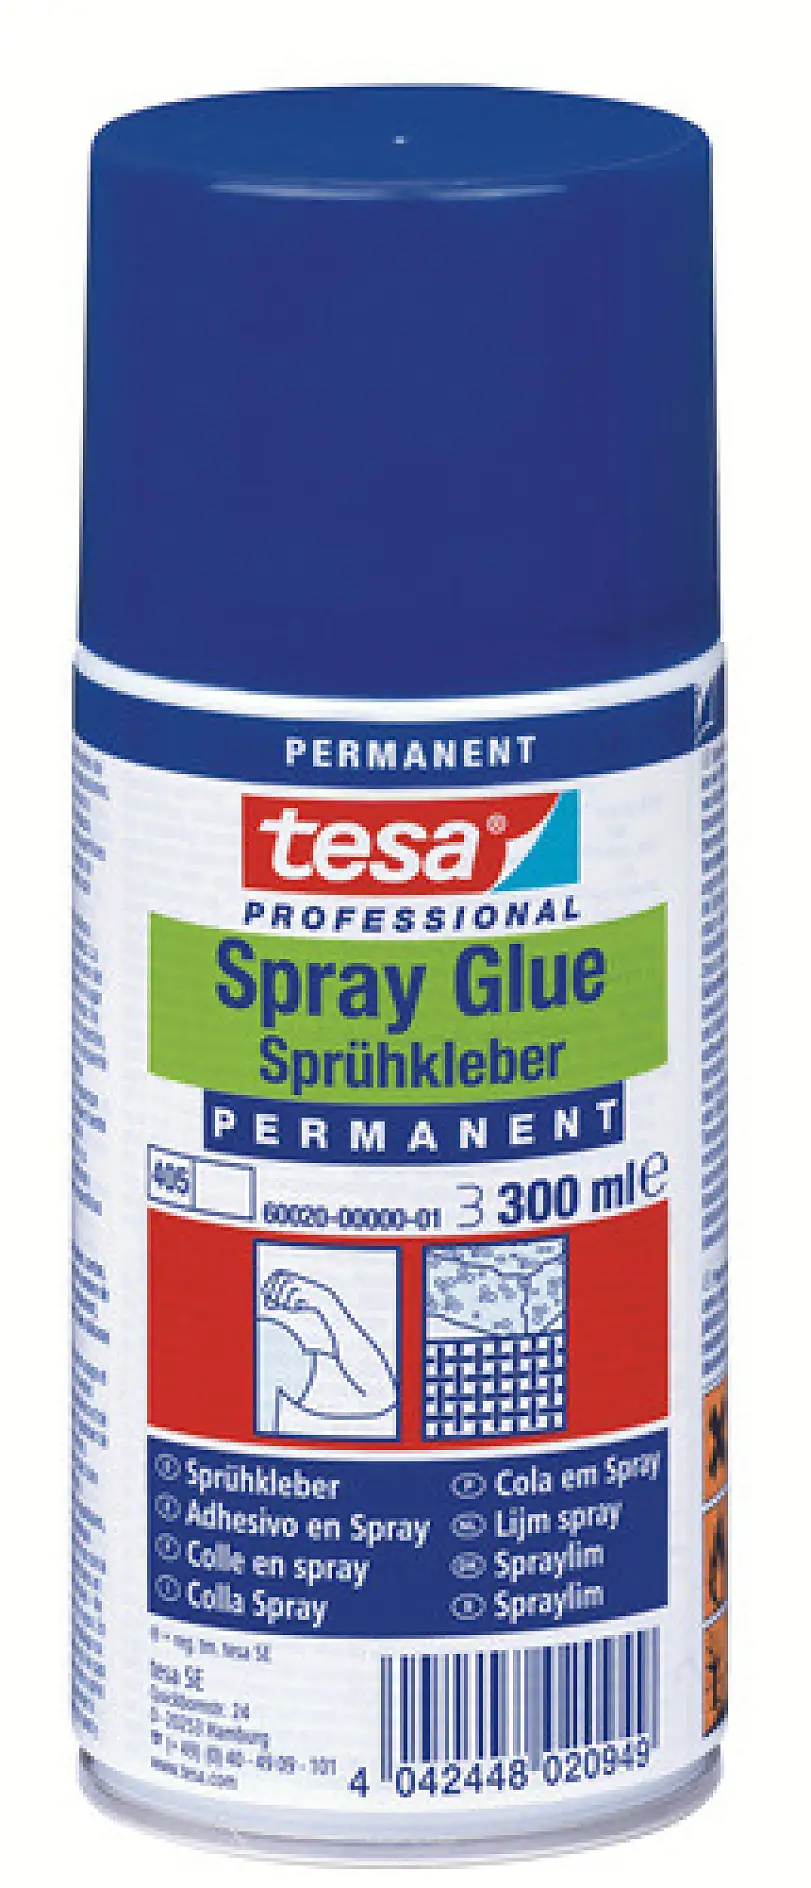 tesa® Spray Glue PERMANENT is a very versatile glue for permanently bonding materials such as paper, card-board, felt, fabric, film, wood, leather, polystyrene and many different plastics.